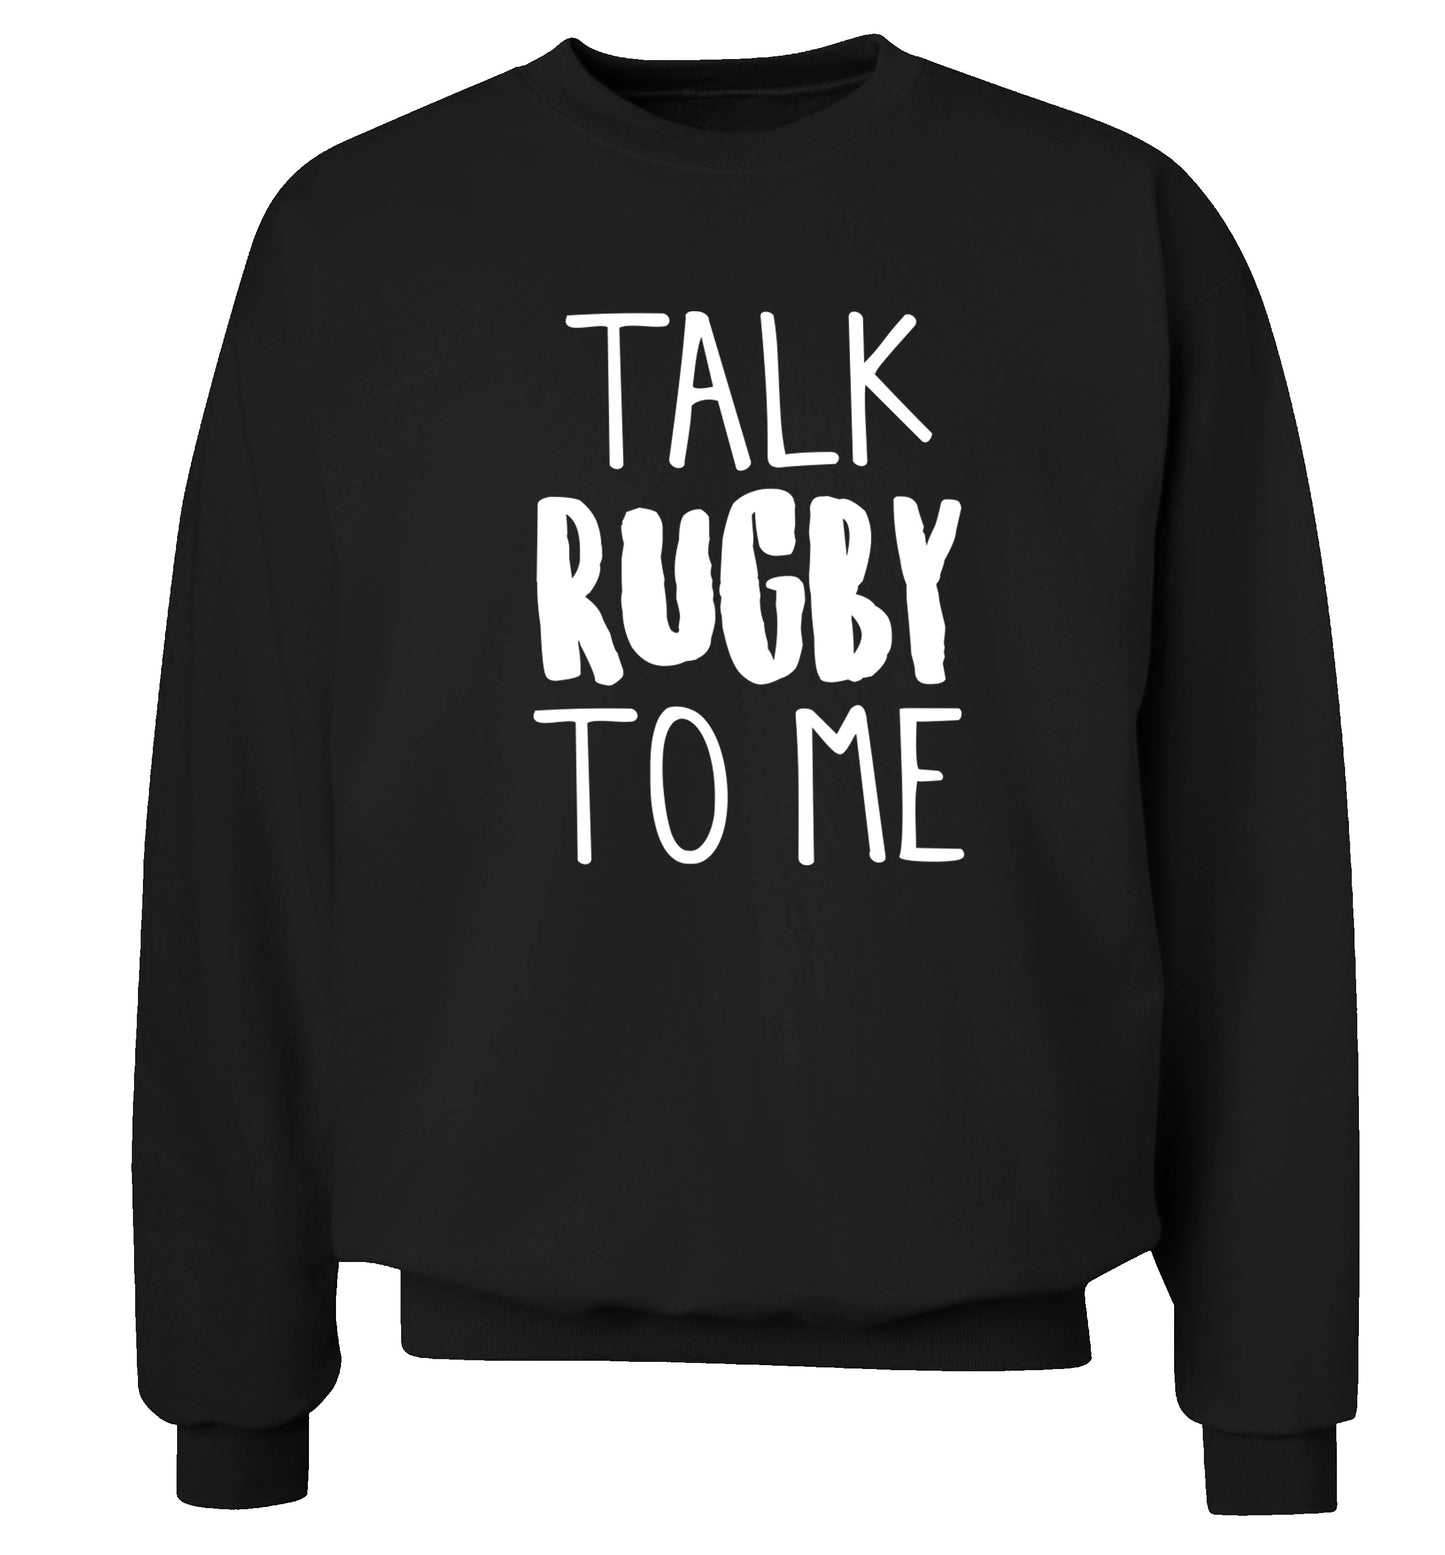 Talk rugby to me Adult's unisex black Sweater 2XL